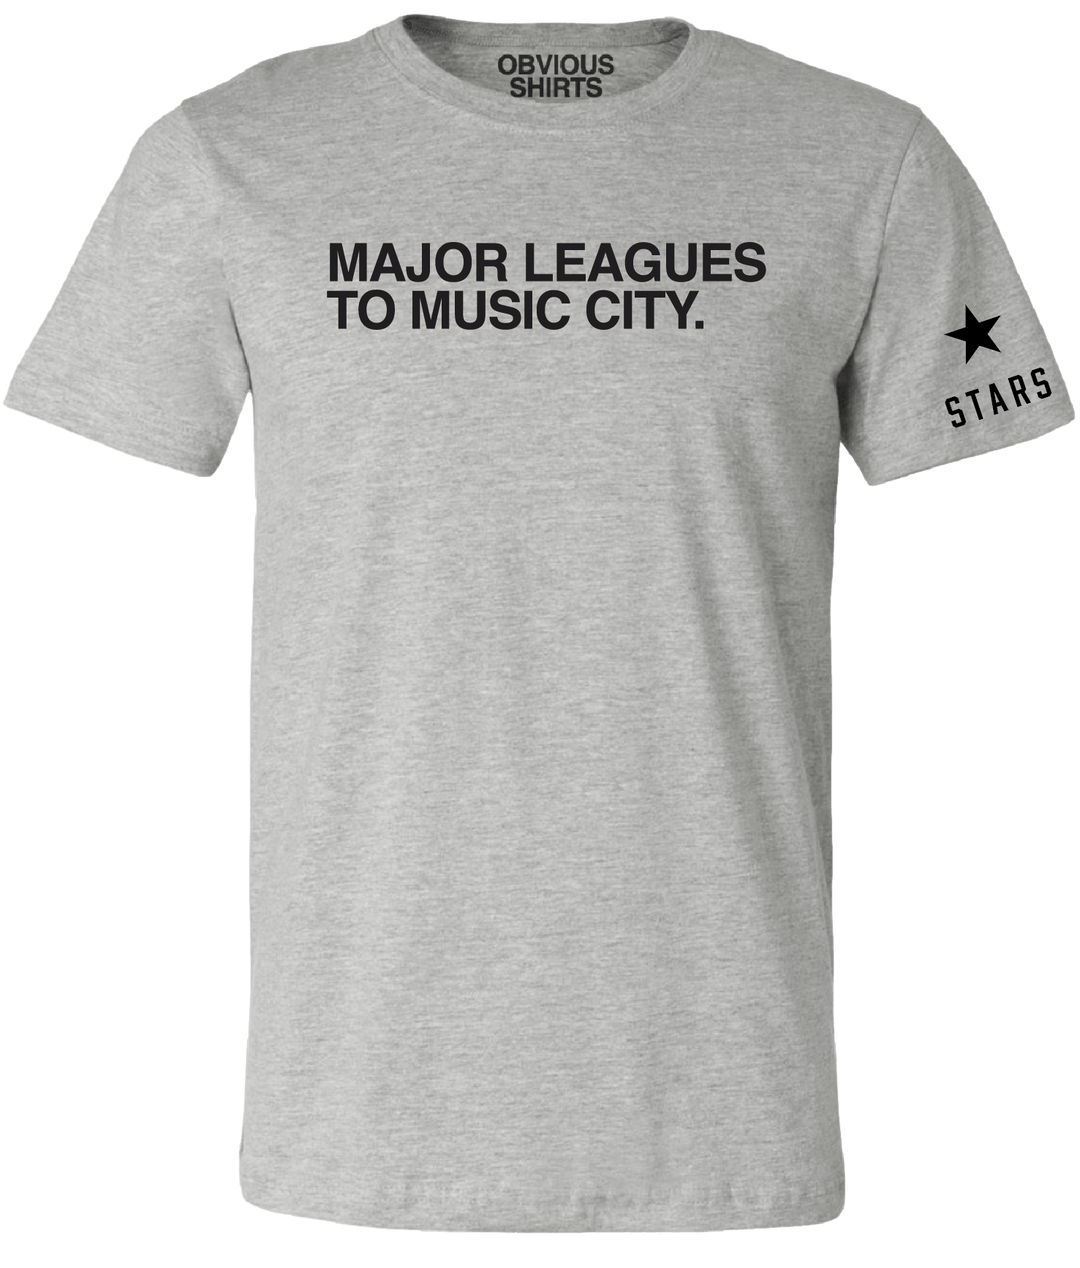 MAJOR LEAGUES TO MUSIC CITY. (GREY) - OBVIOUS SHIRTS